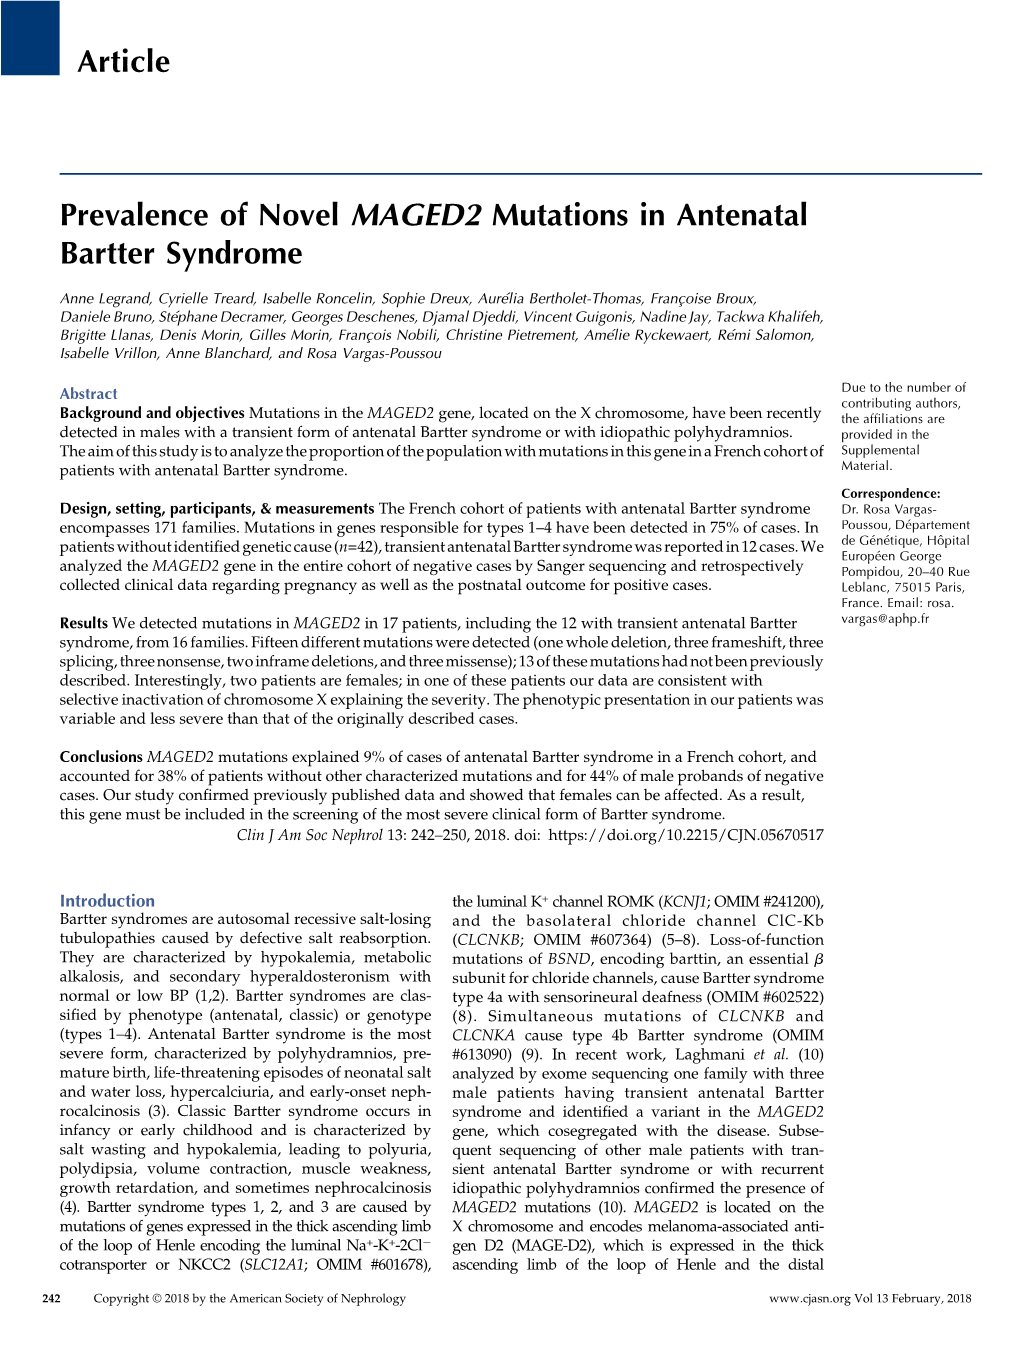 Prevalence of Novel MAGED2 Mutations in Antenatal Bartter Syndrome